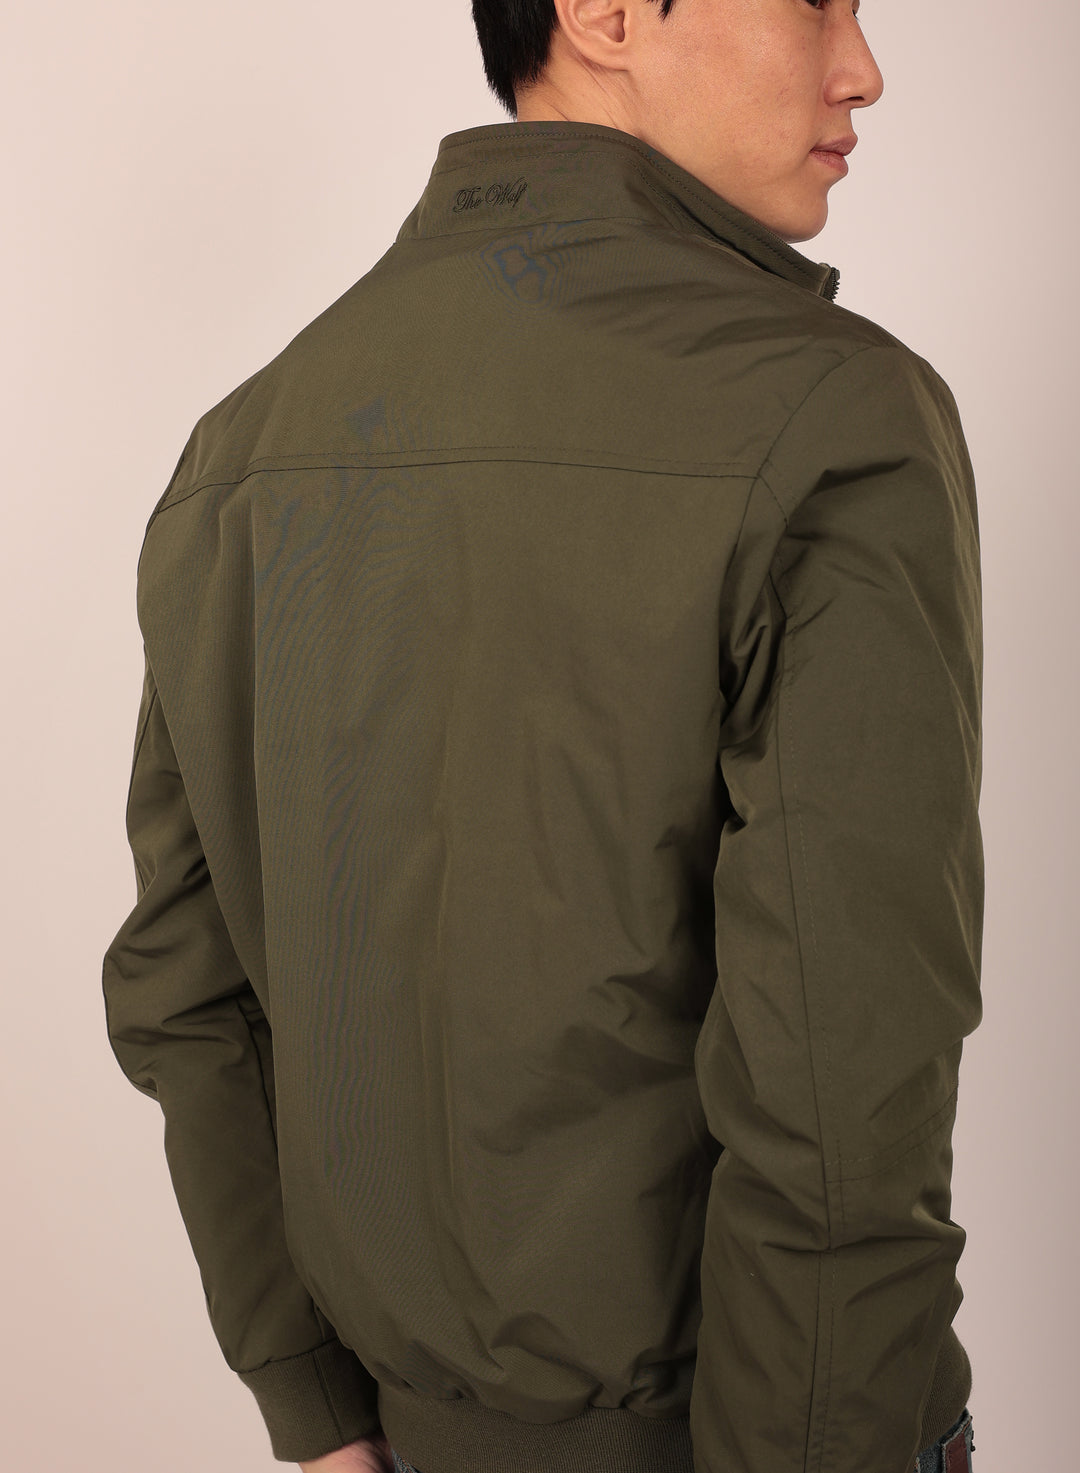 Wimbledon Relaxed Jacket in Olive